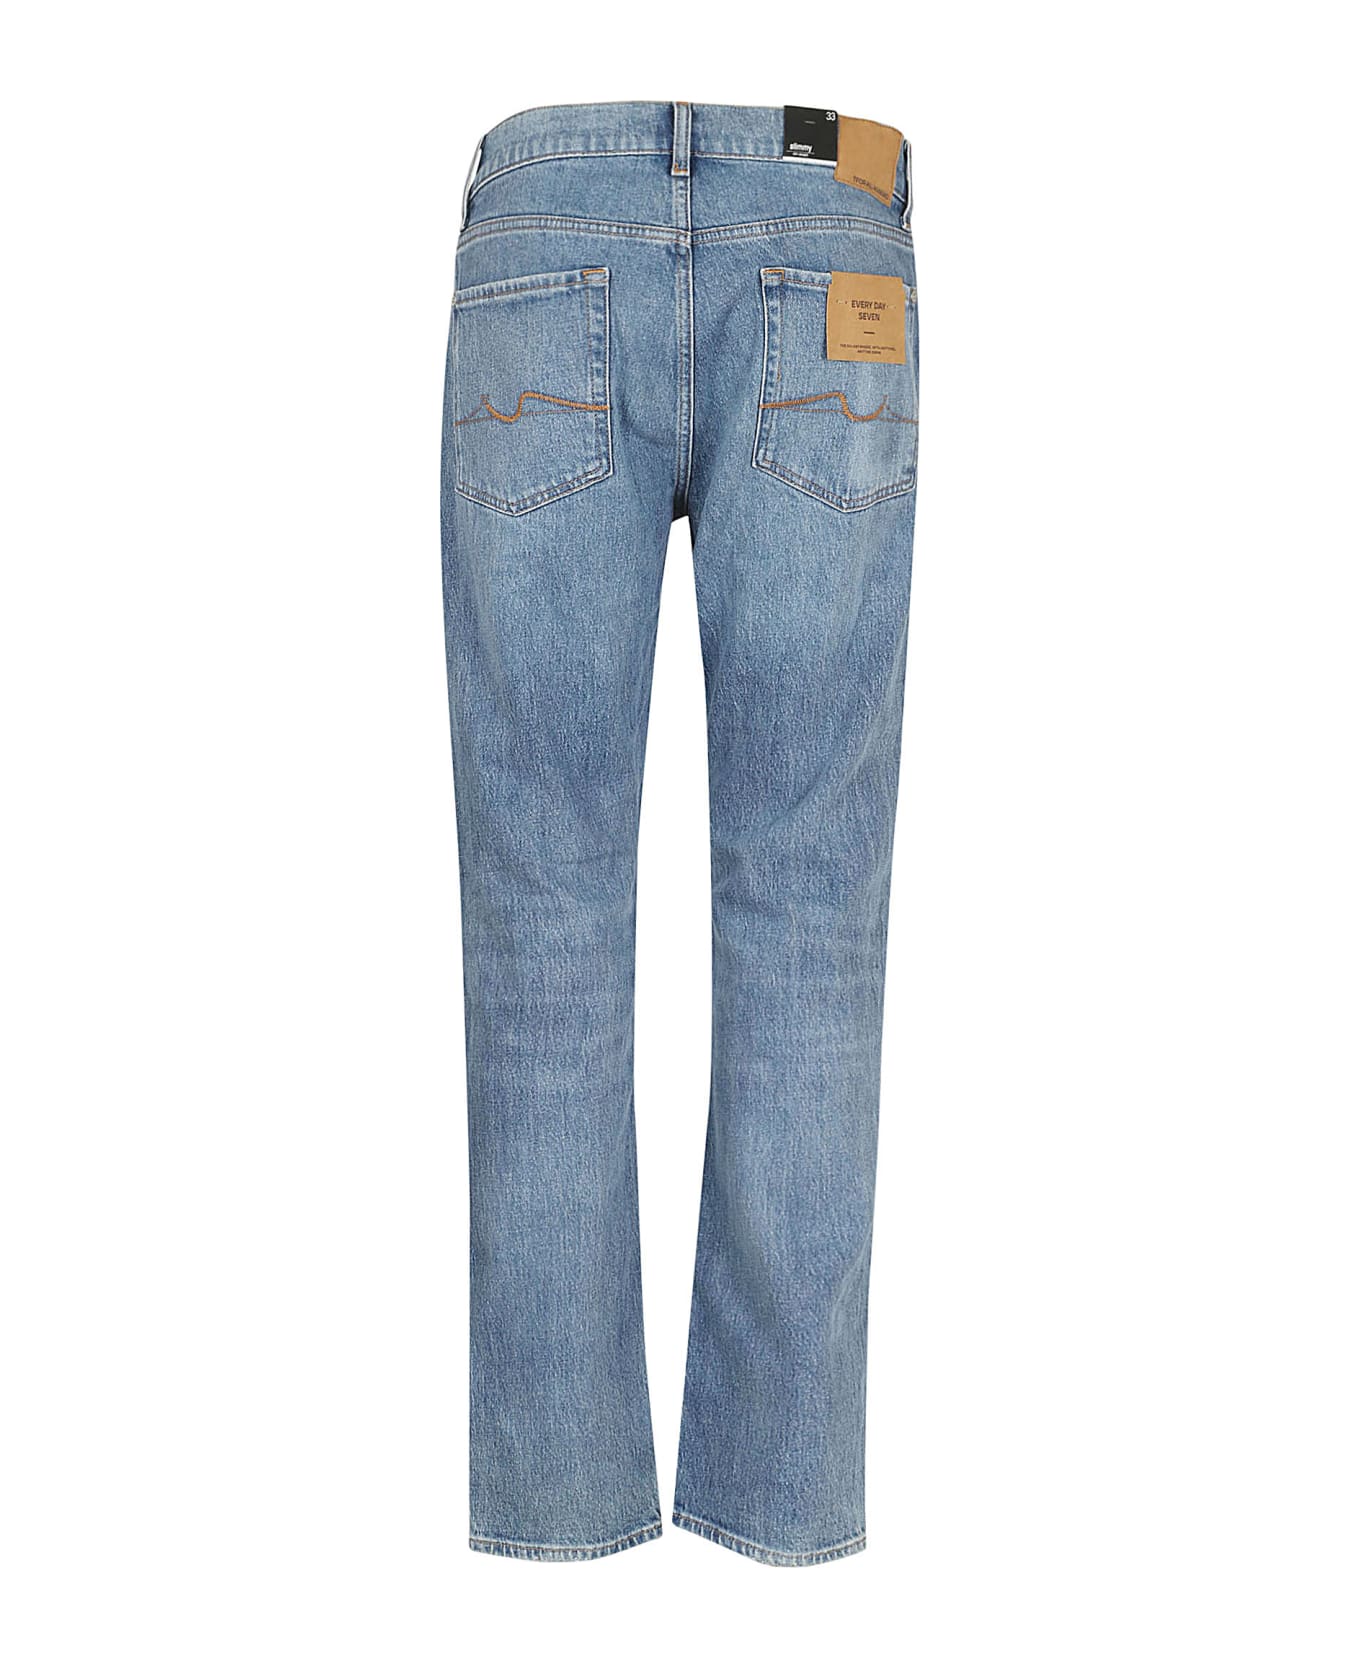 7 For All Mankind Slimmy Get Ahead - Light Blue